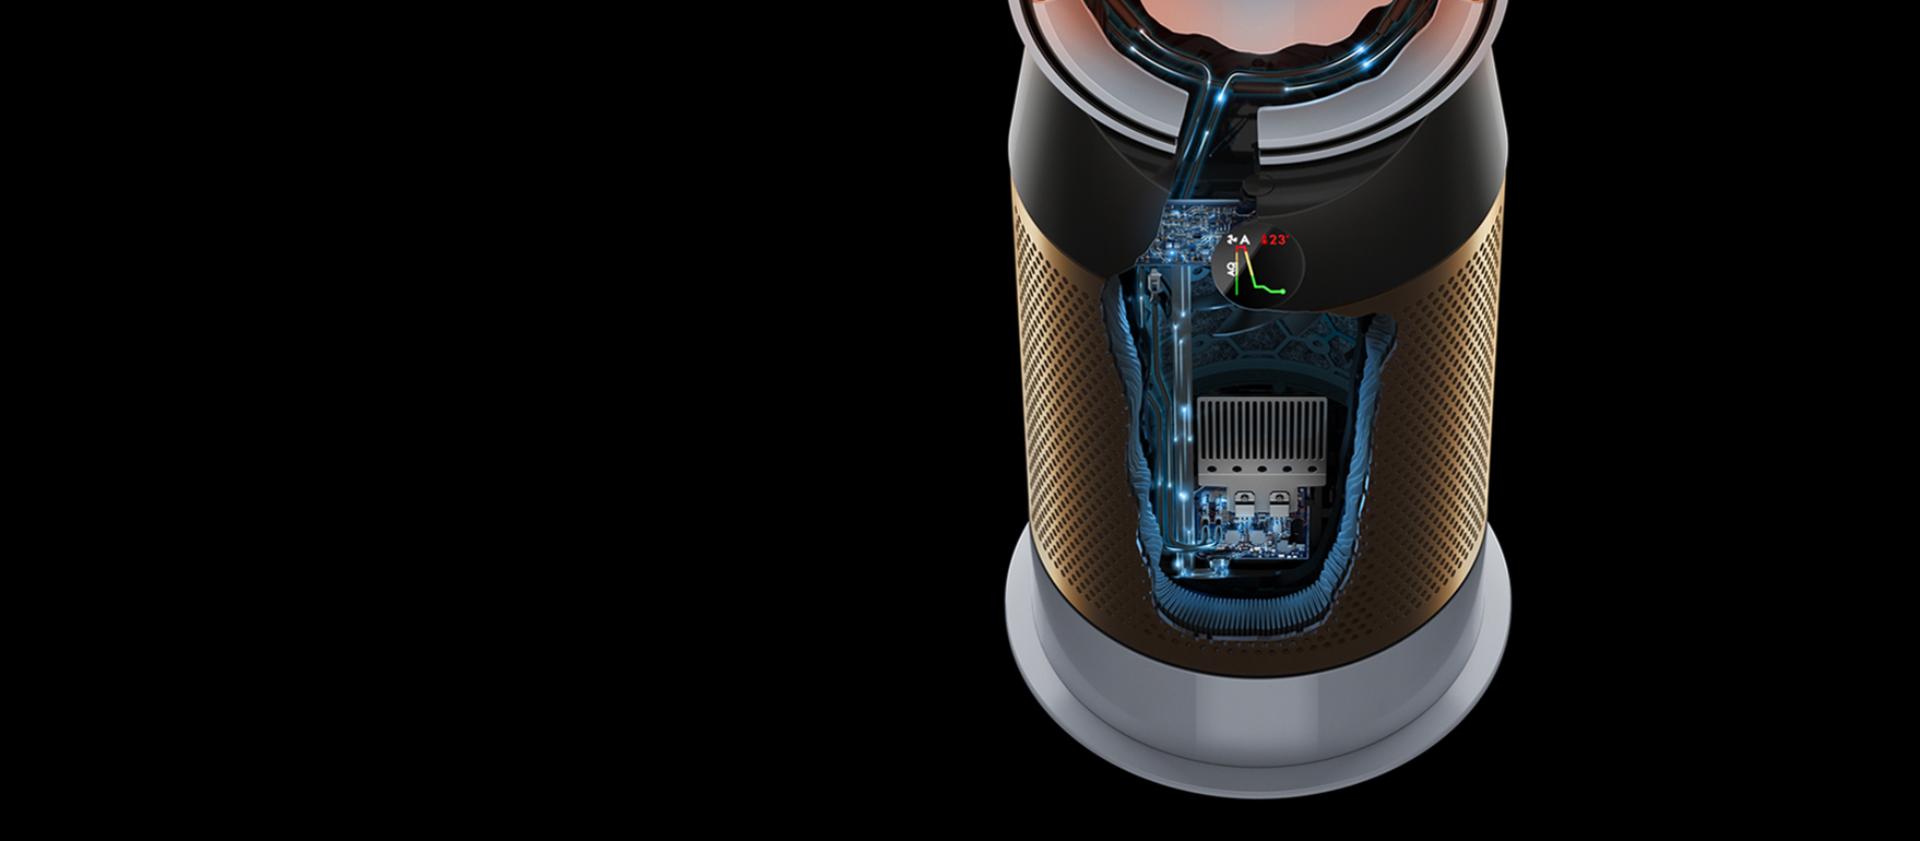 The Dyson Pure Hot+Cool Cryptomic with its ceramic heating plates and thermostat exposed